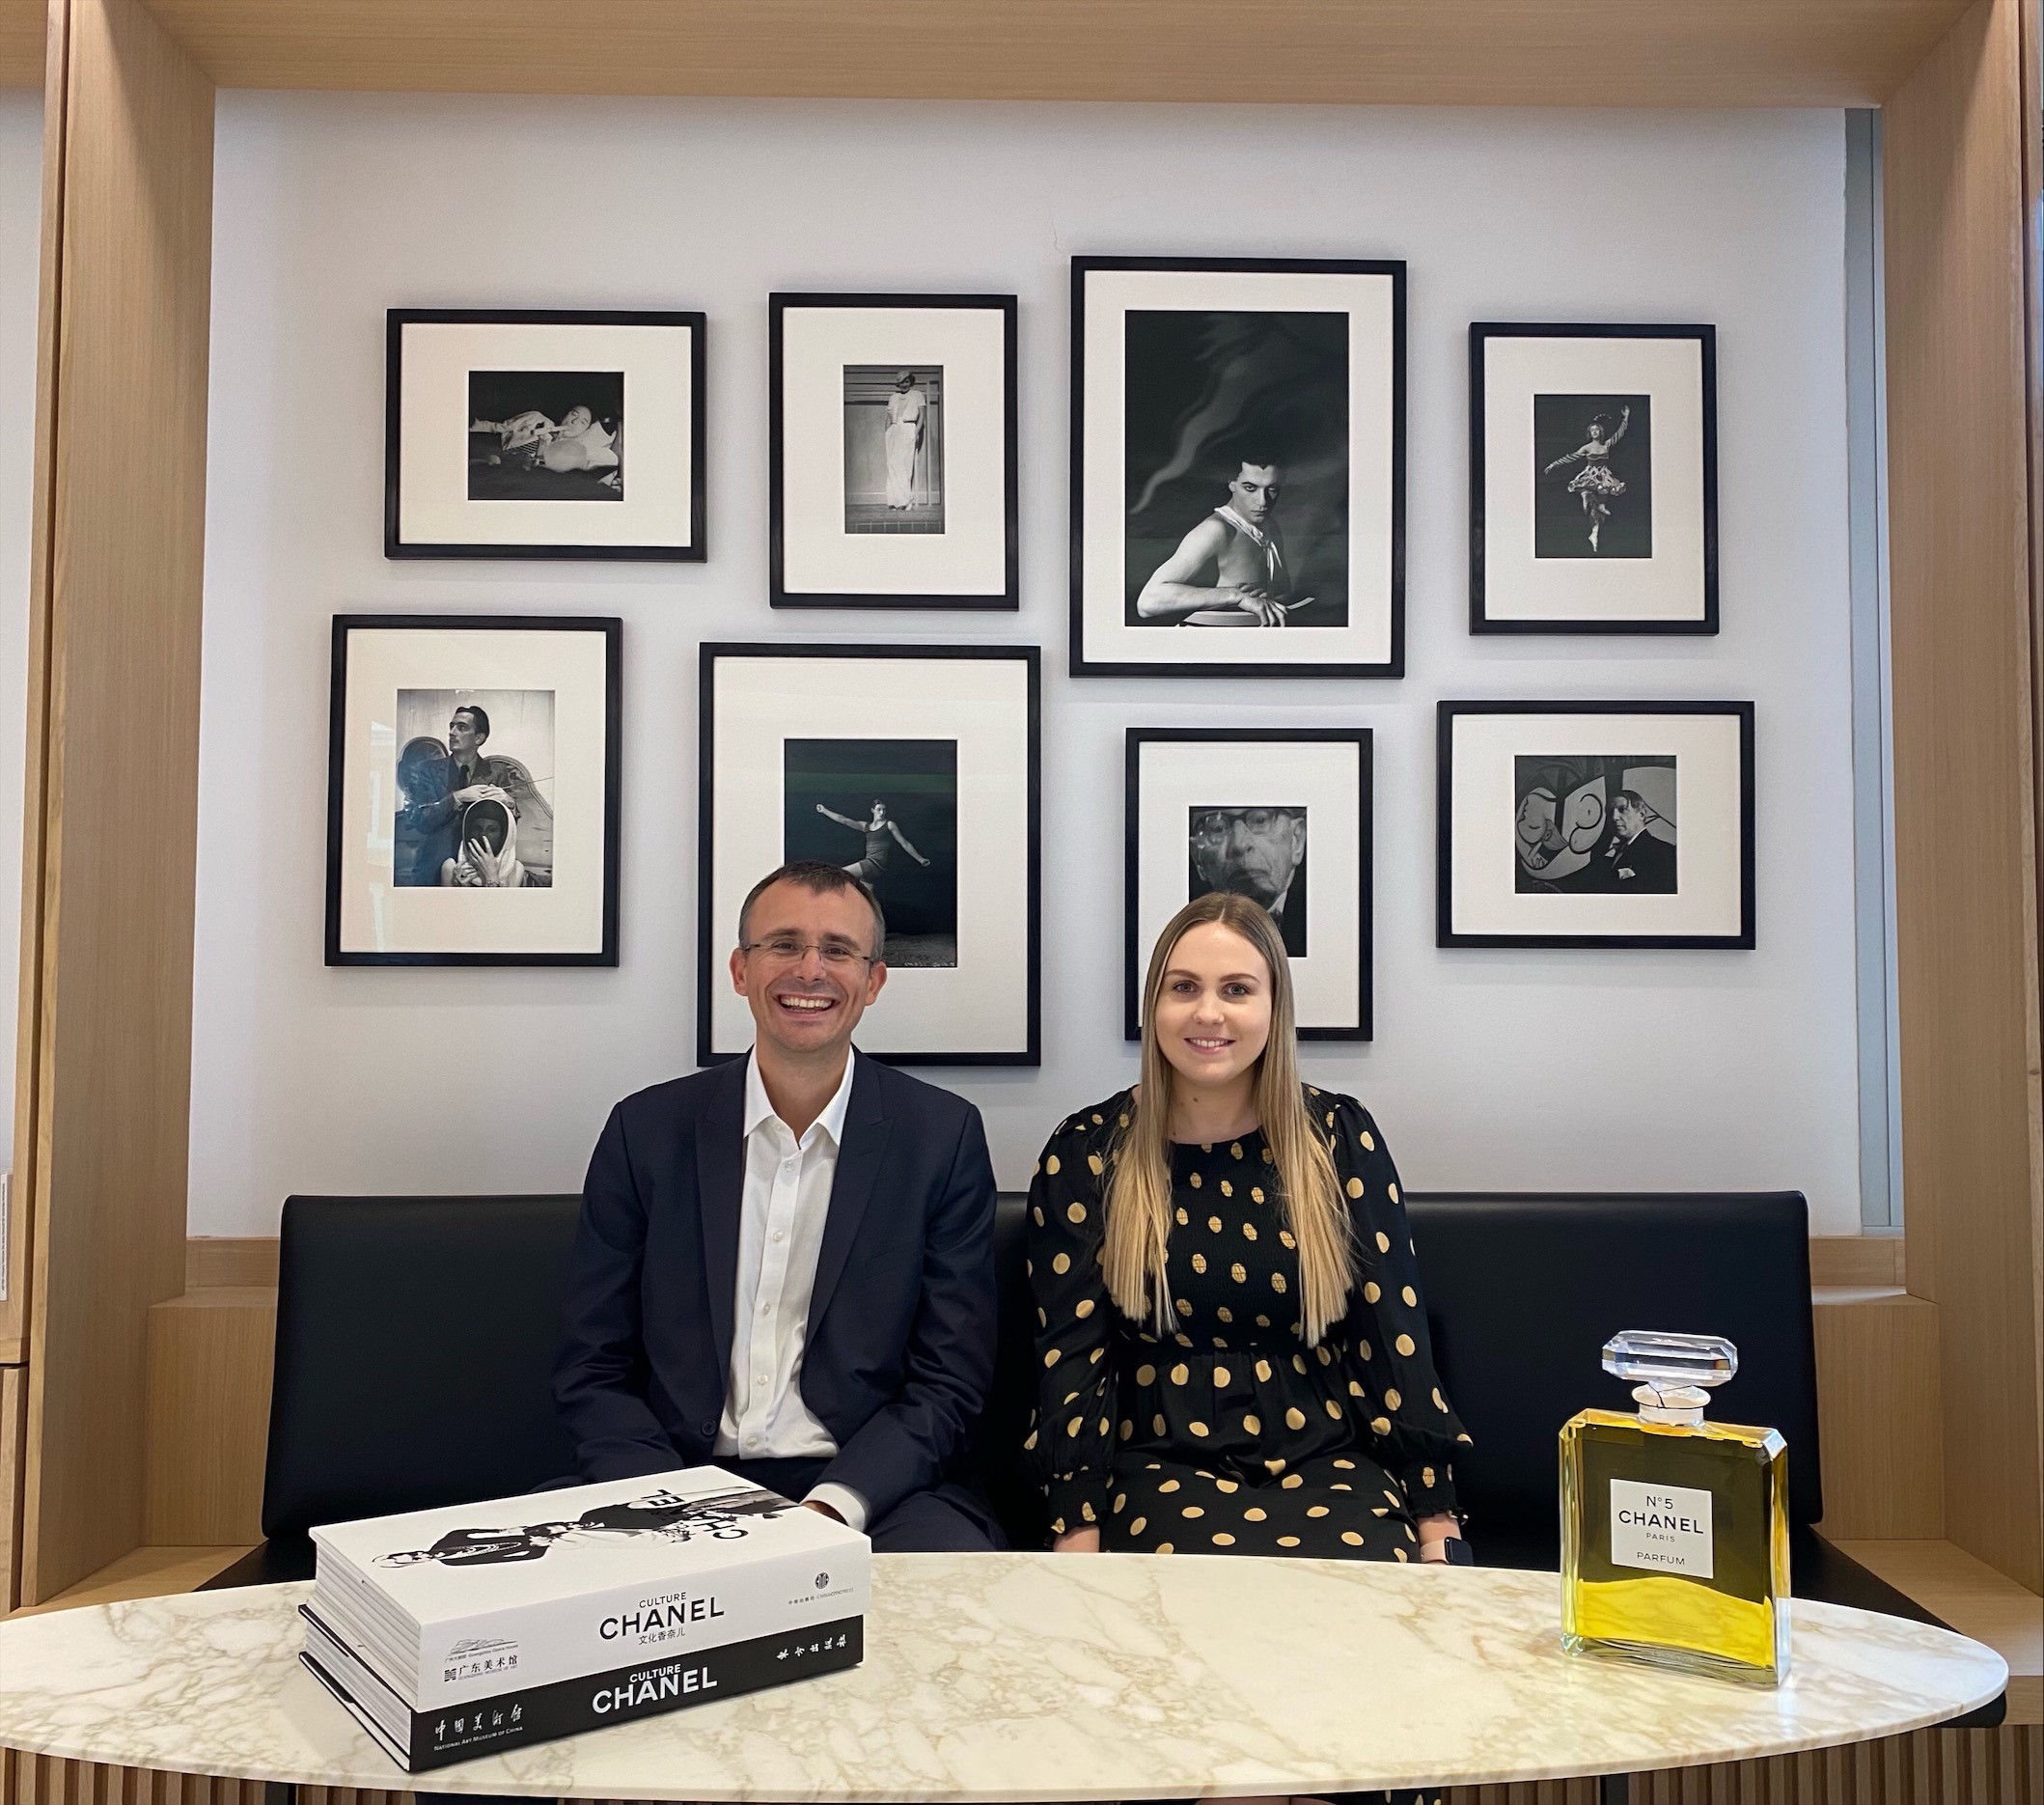 Essex graduates Steve and Charlotte sat together in their office with numerous pieces of Chanel merchandise